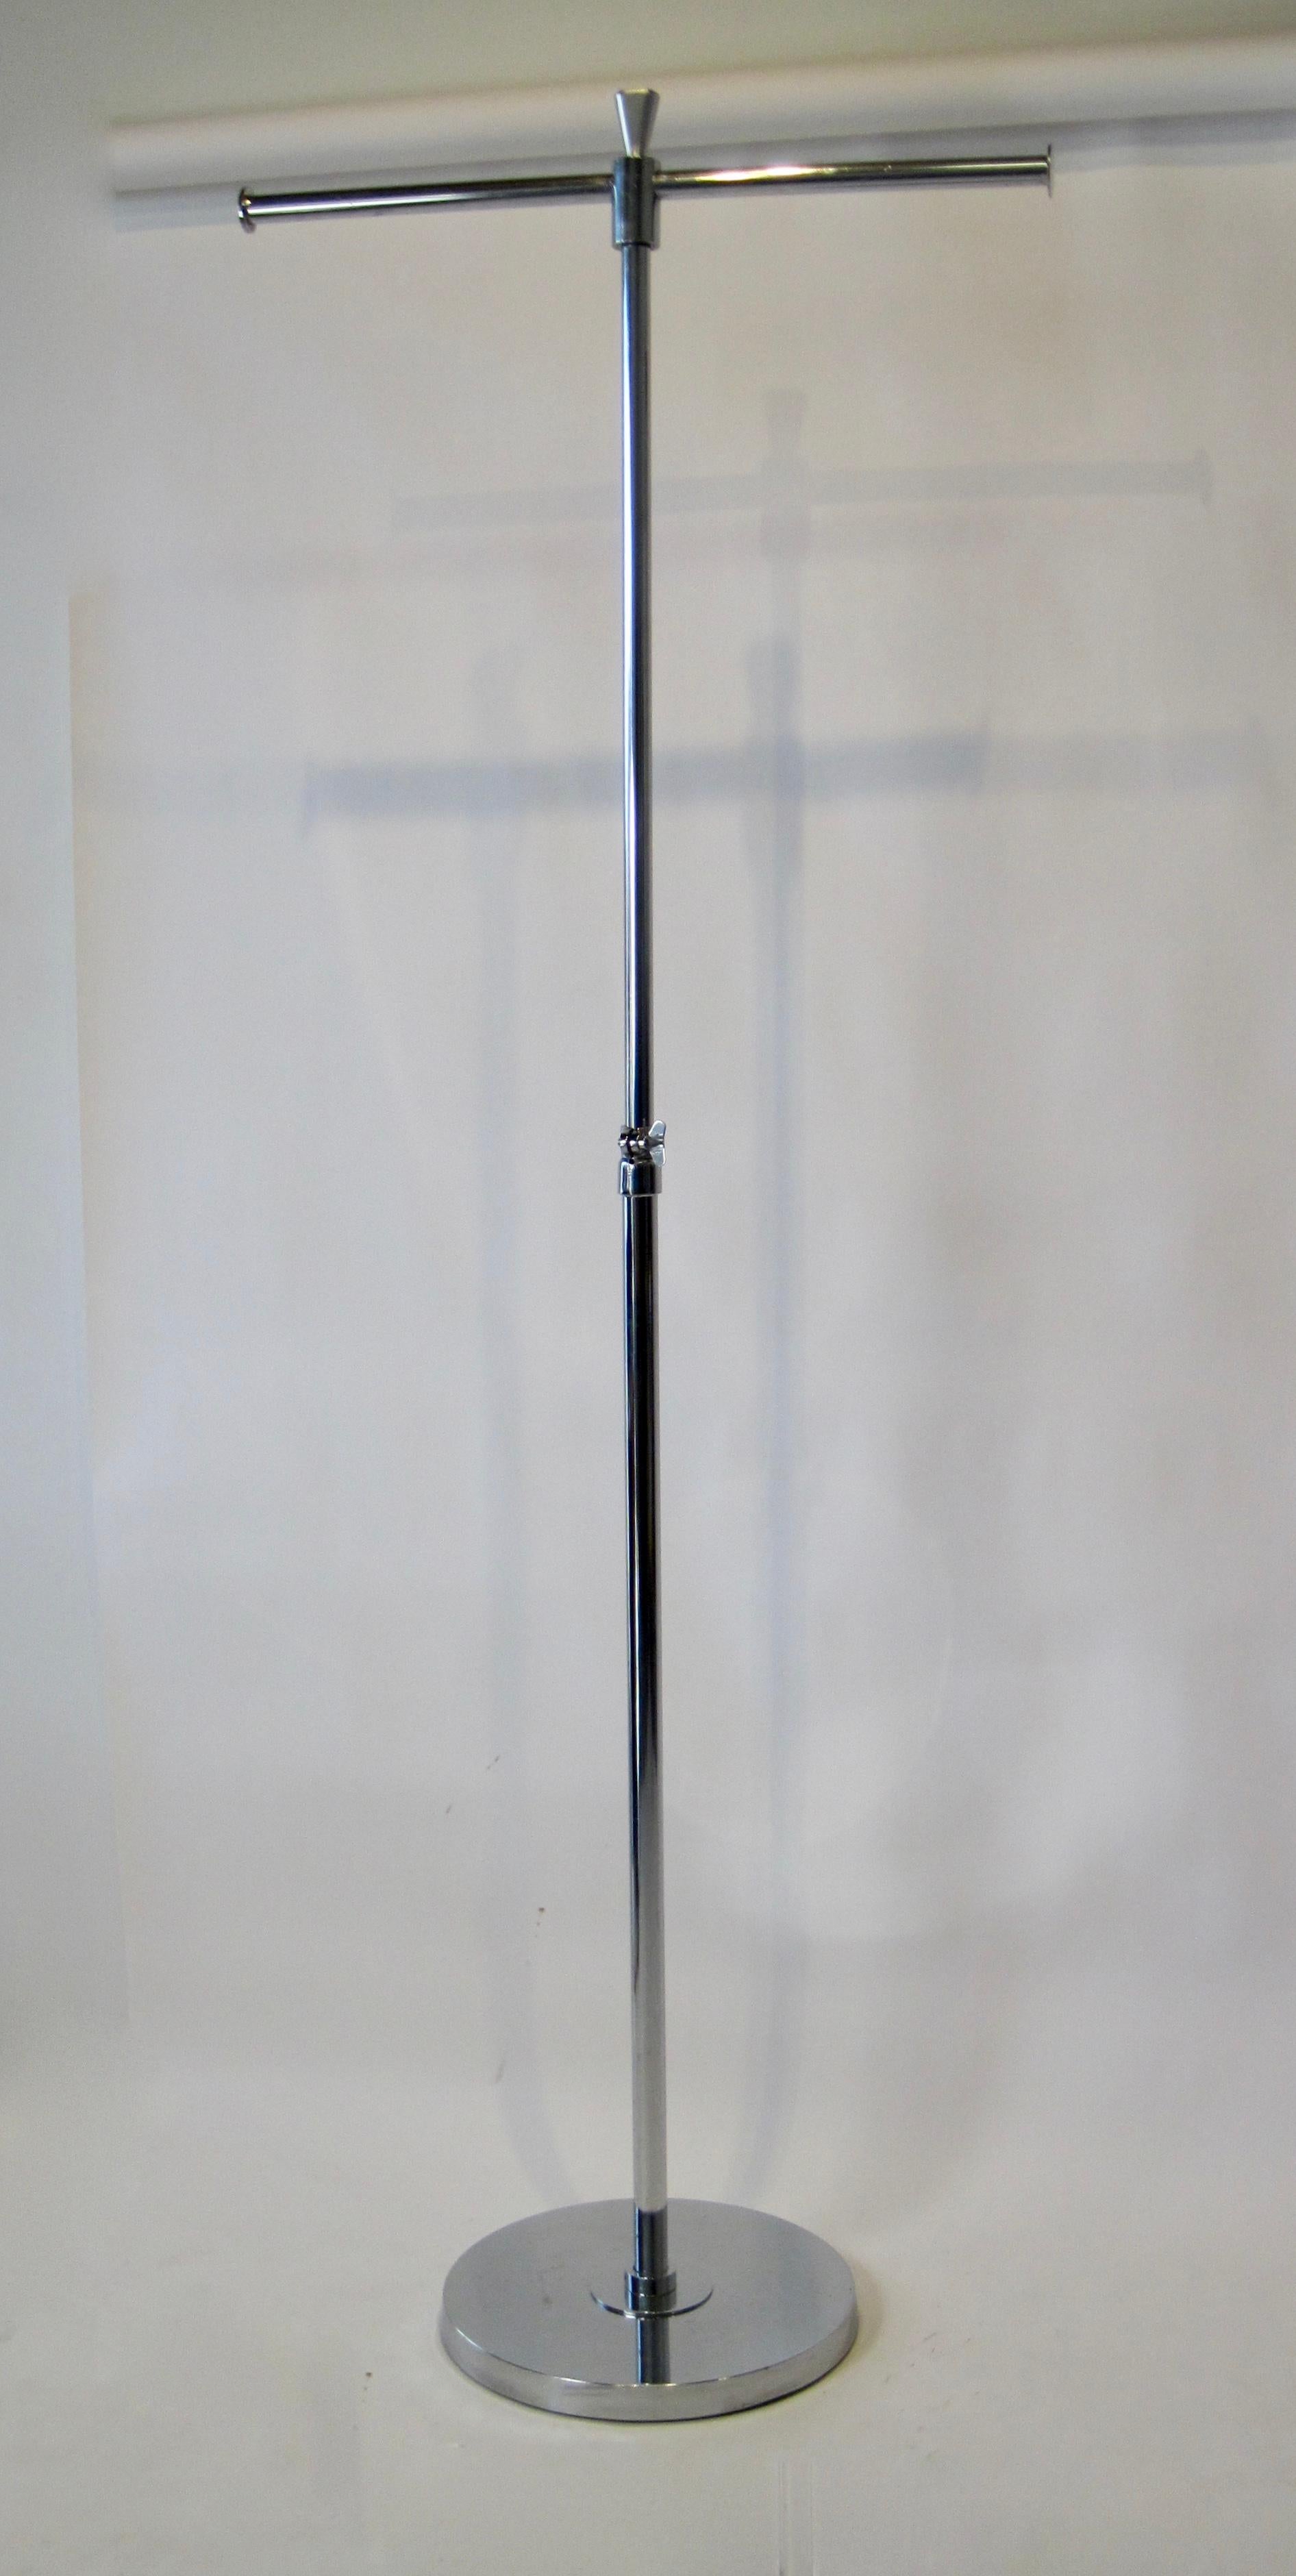 A 1940s chrome plated adjustable t-bar clothing rack stand with cast iron base. Height can be as tall as 76